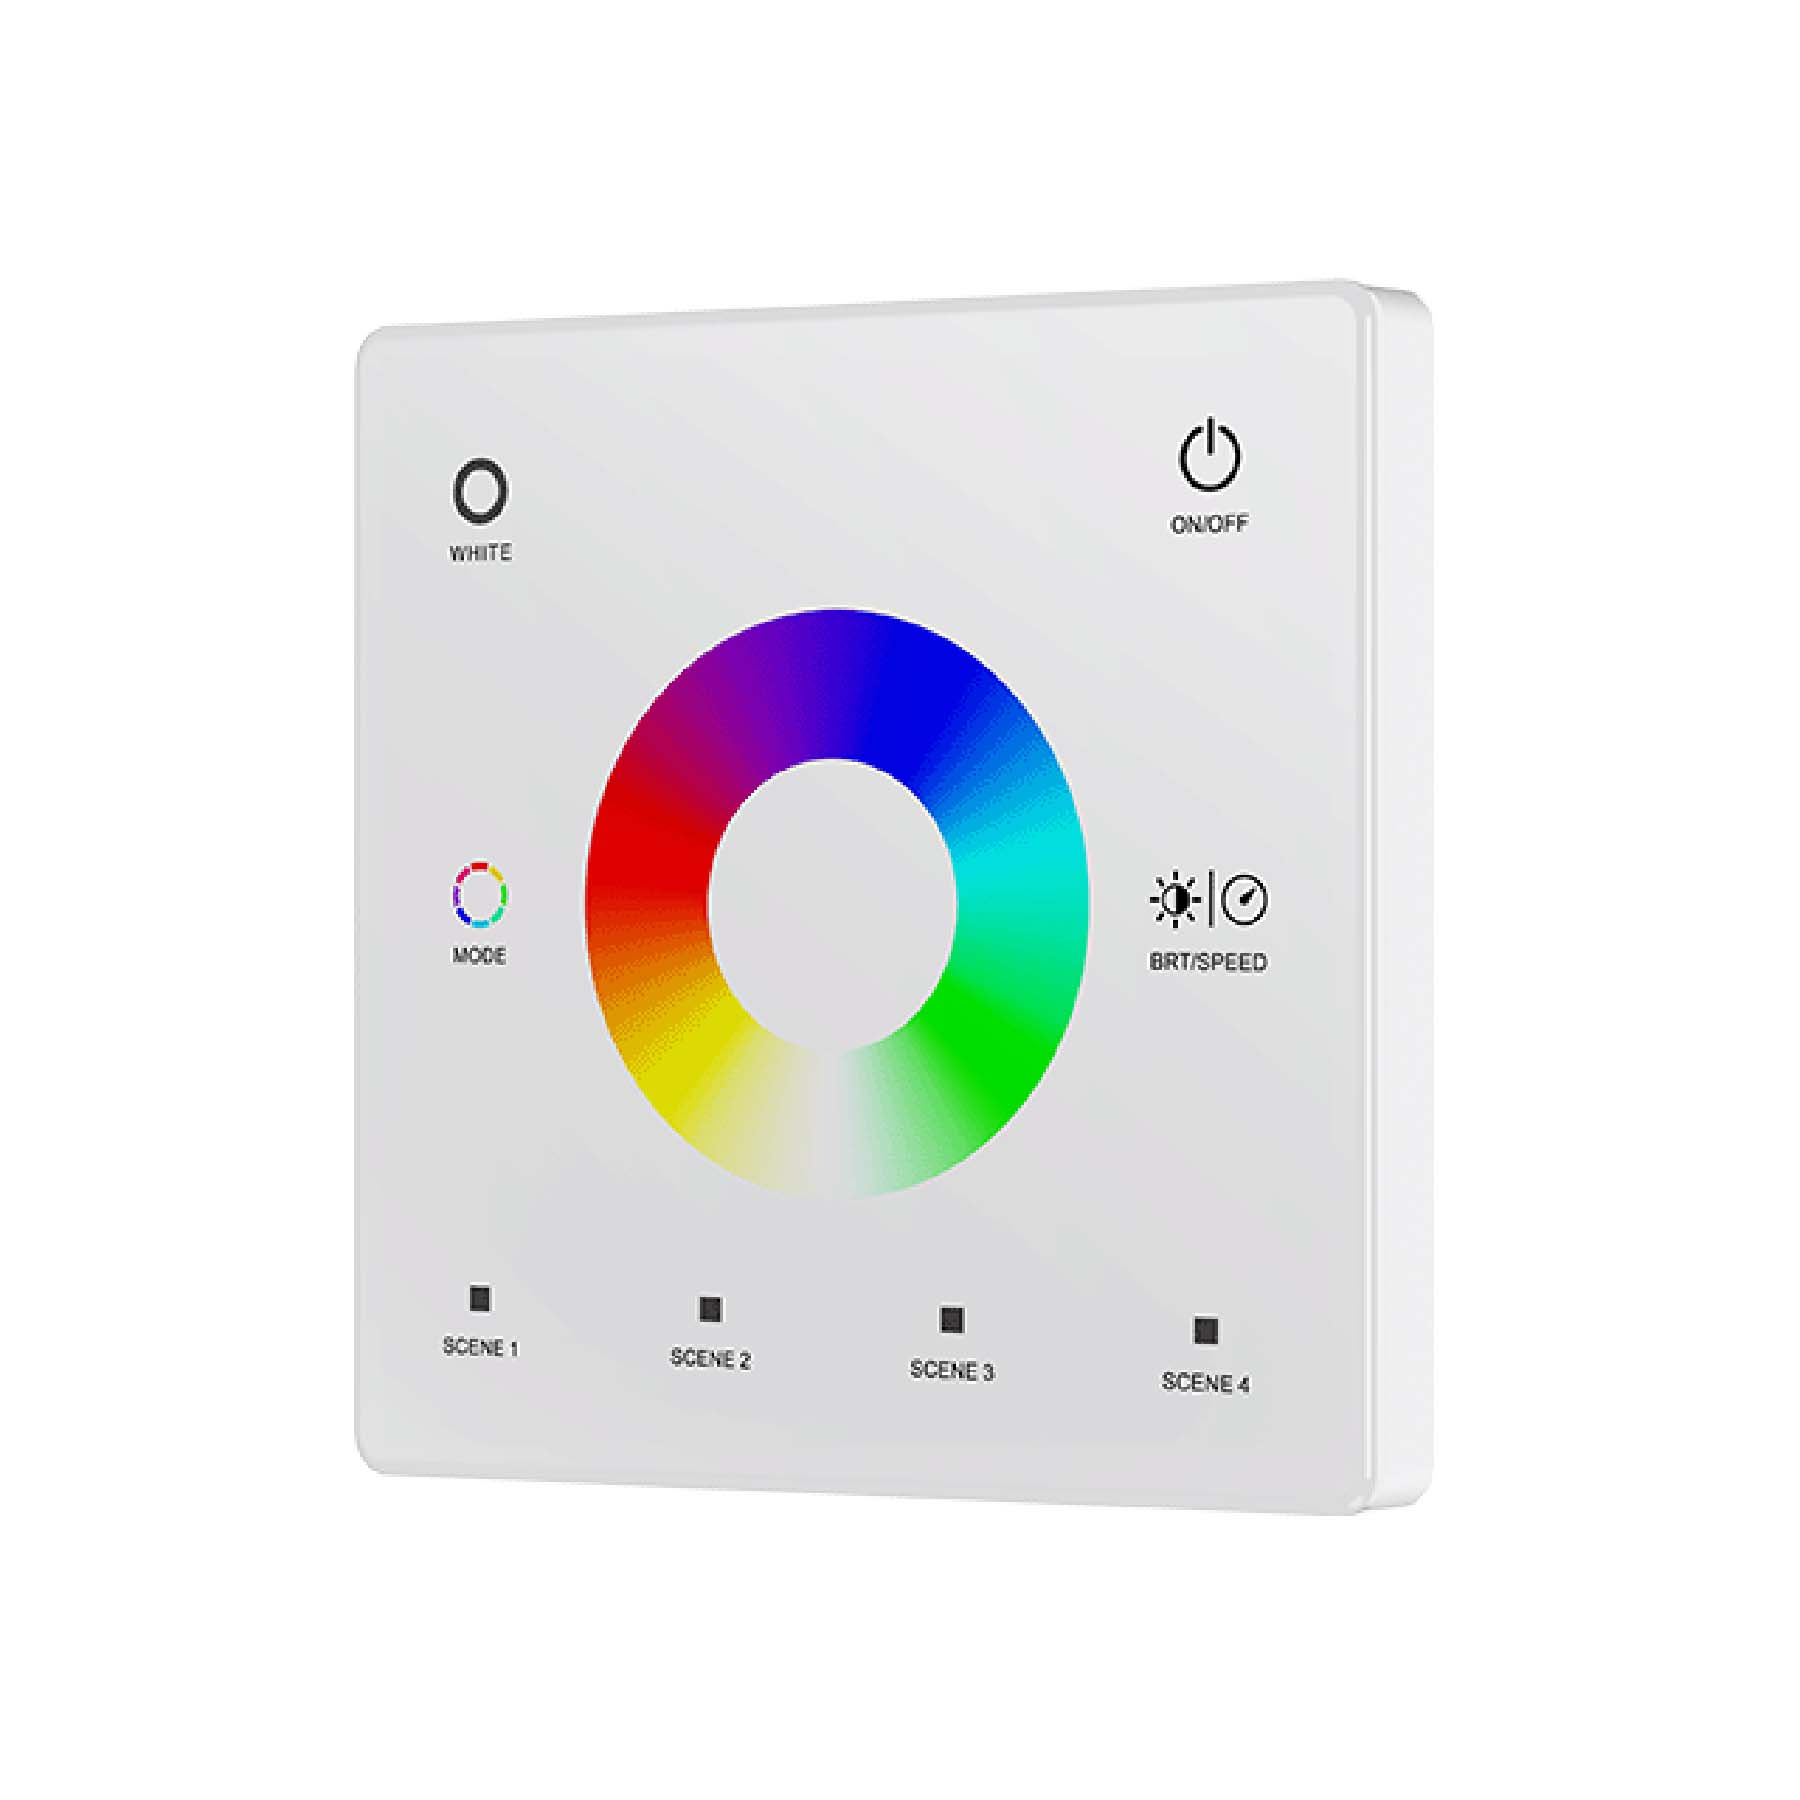 G.W.S. LED LED 100-240V AC RGB/RGBW Controller S3 + 1 Zone Panel Remote Control 1*CR2032 Battery TW4